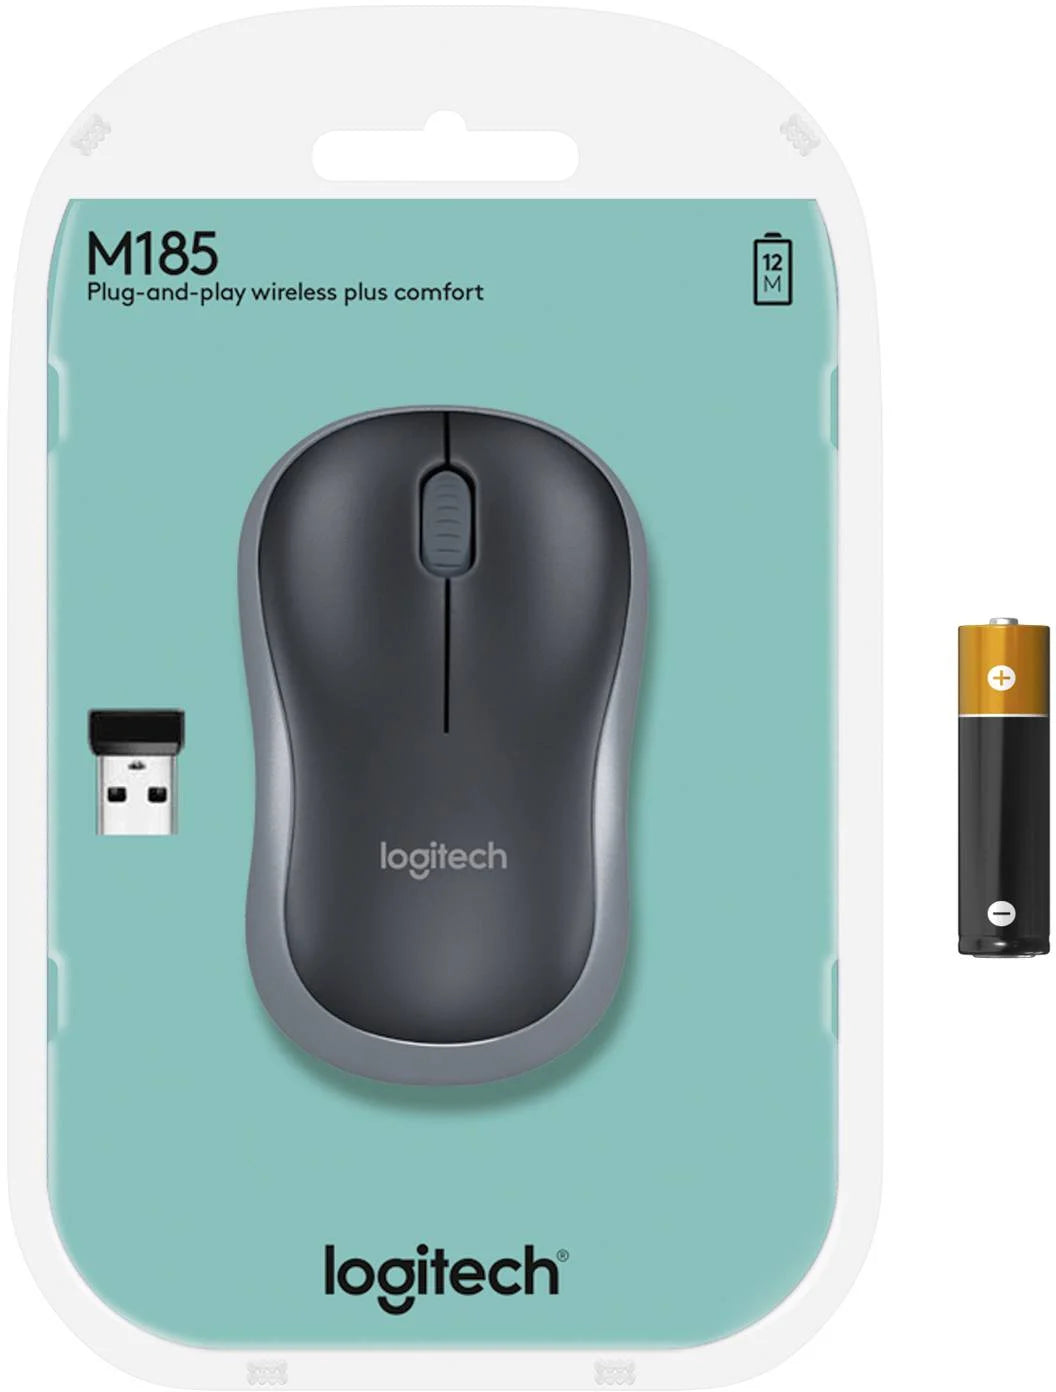 Is there a difference between Logitech's 'USB Nano receiver' and